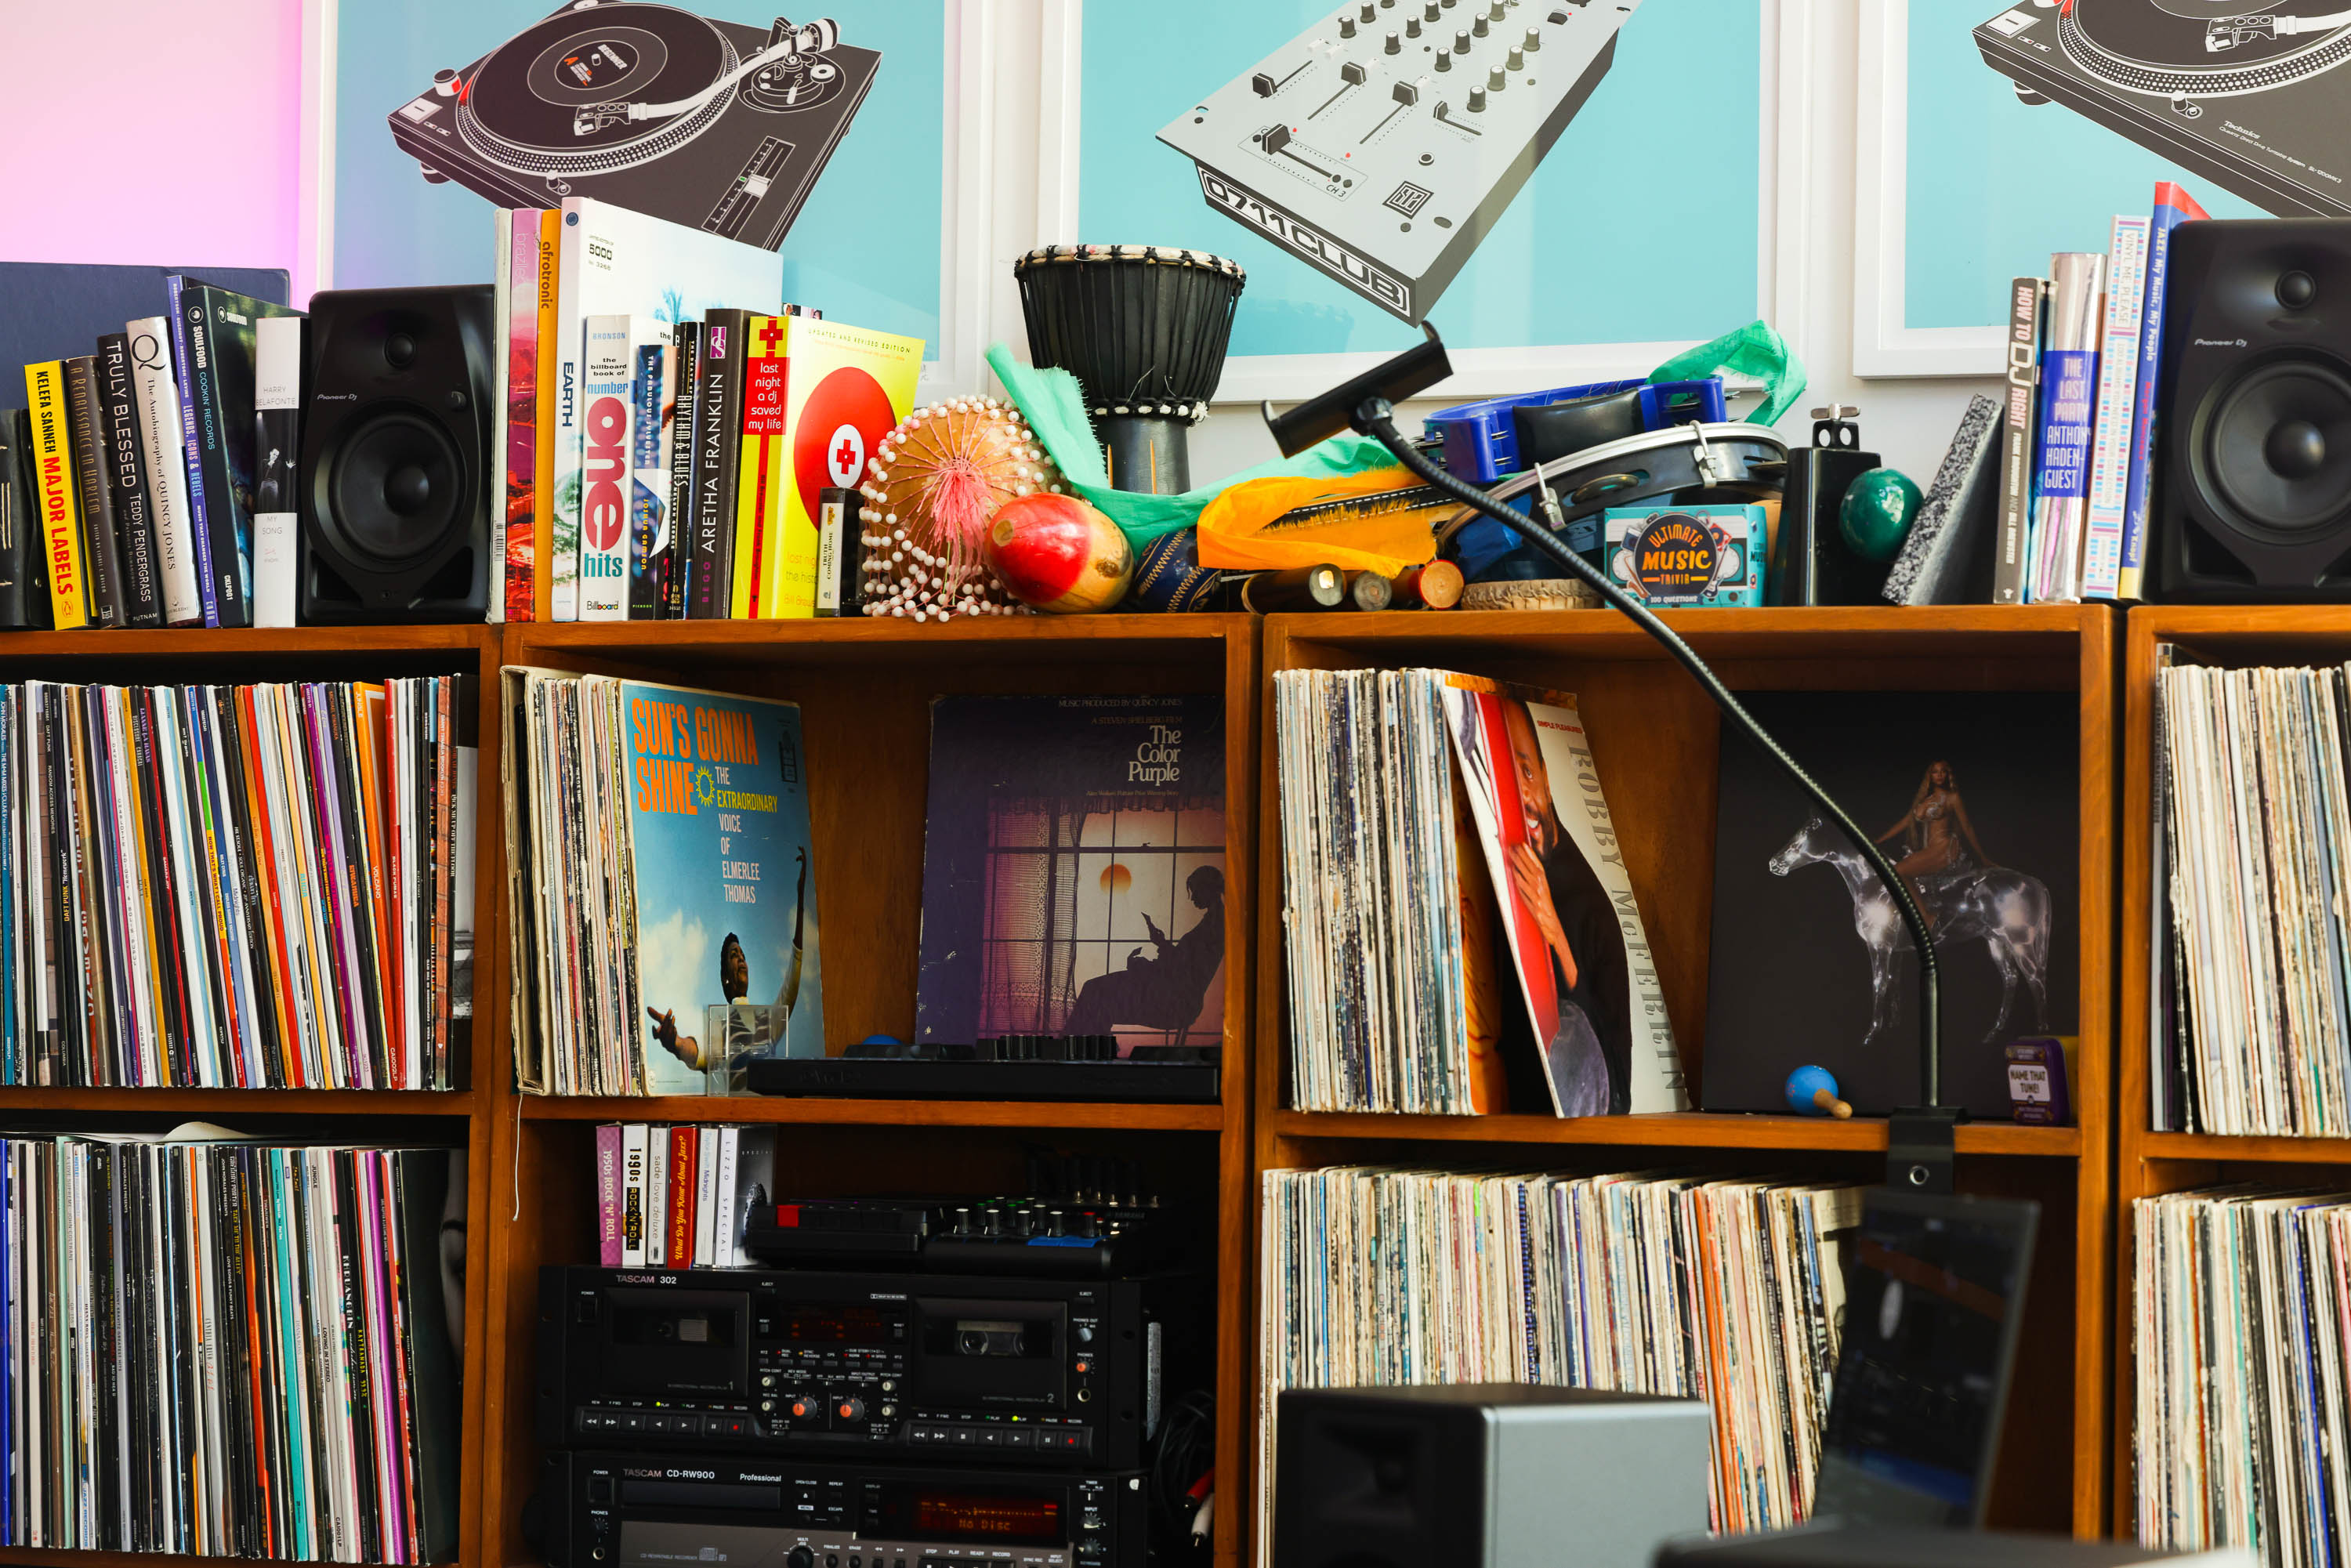 A wooden shelf filled with vinyl records, stereo equipment, books, and musical instruments against a blue wall.